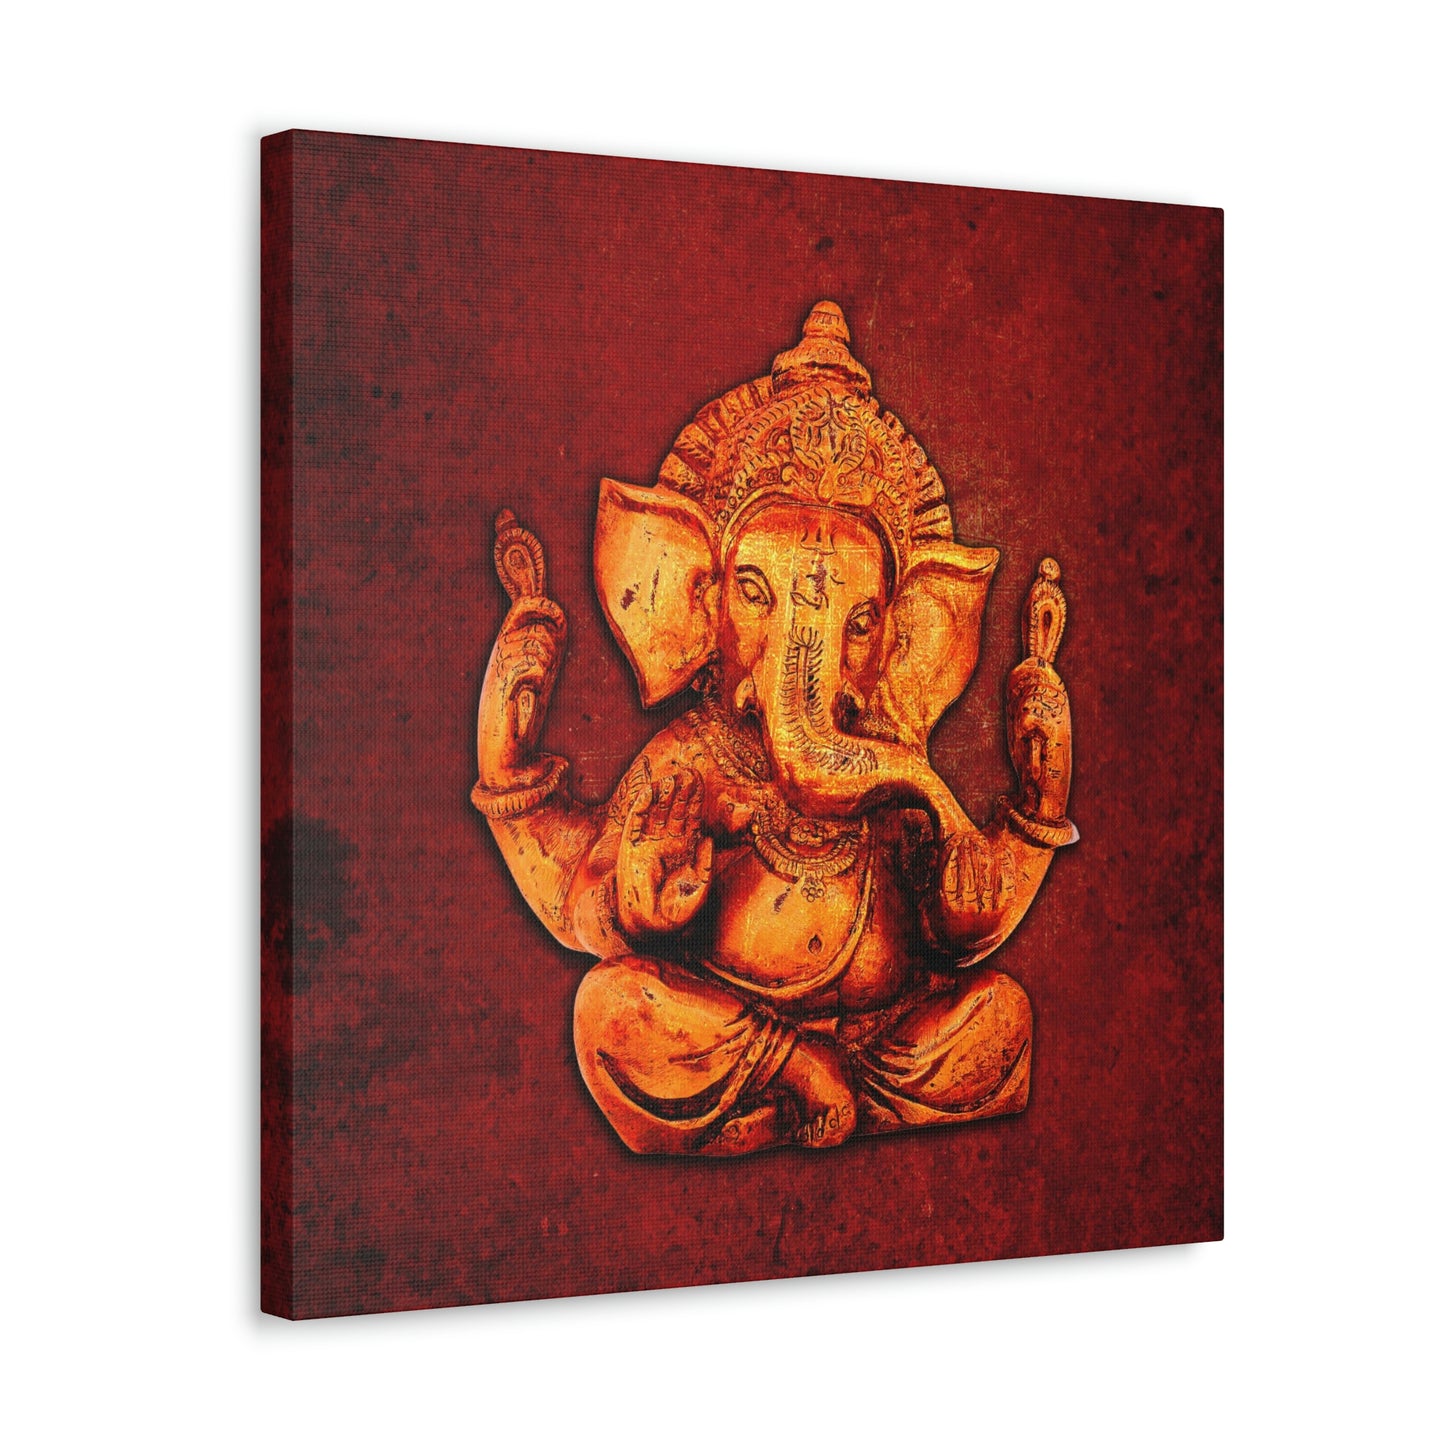 Ganesha on a Distressed Lava Red Background Print on Unframed Stretched Canvas side view